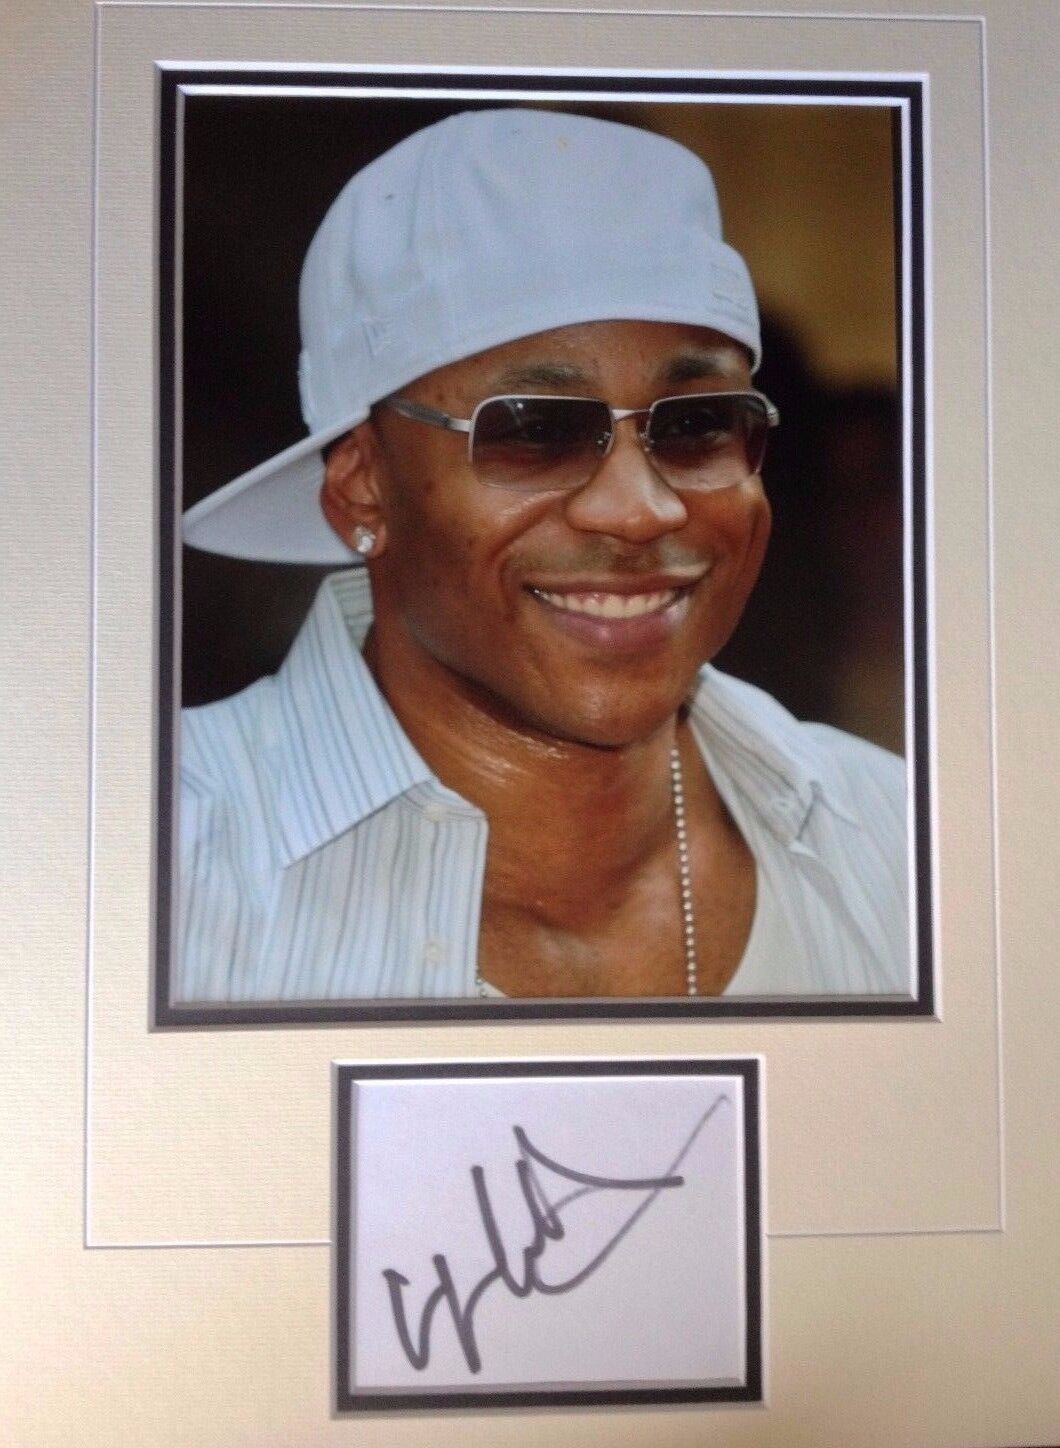 LL COOL J - CHART TOPPING RAPPER & ACTOR - SUPERB SIGNED Photo Poster painting DISPLAY